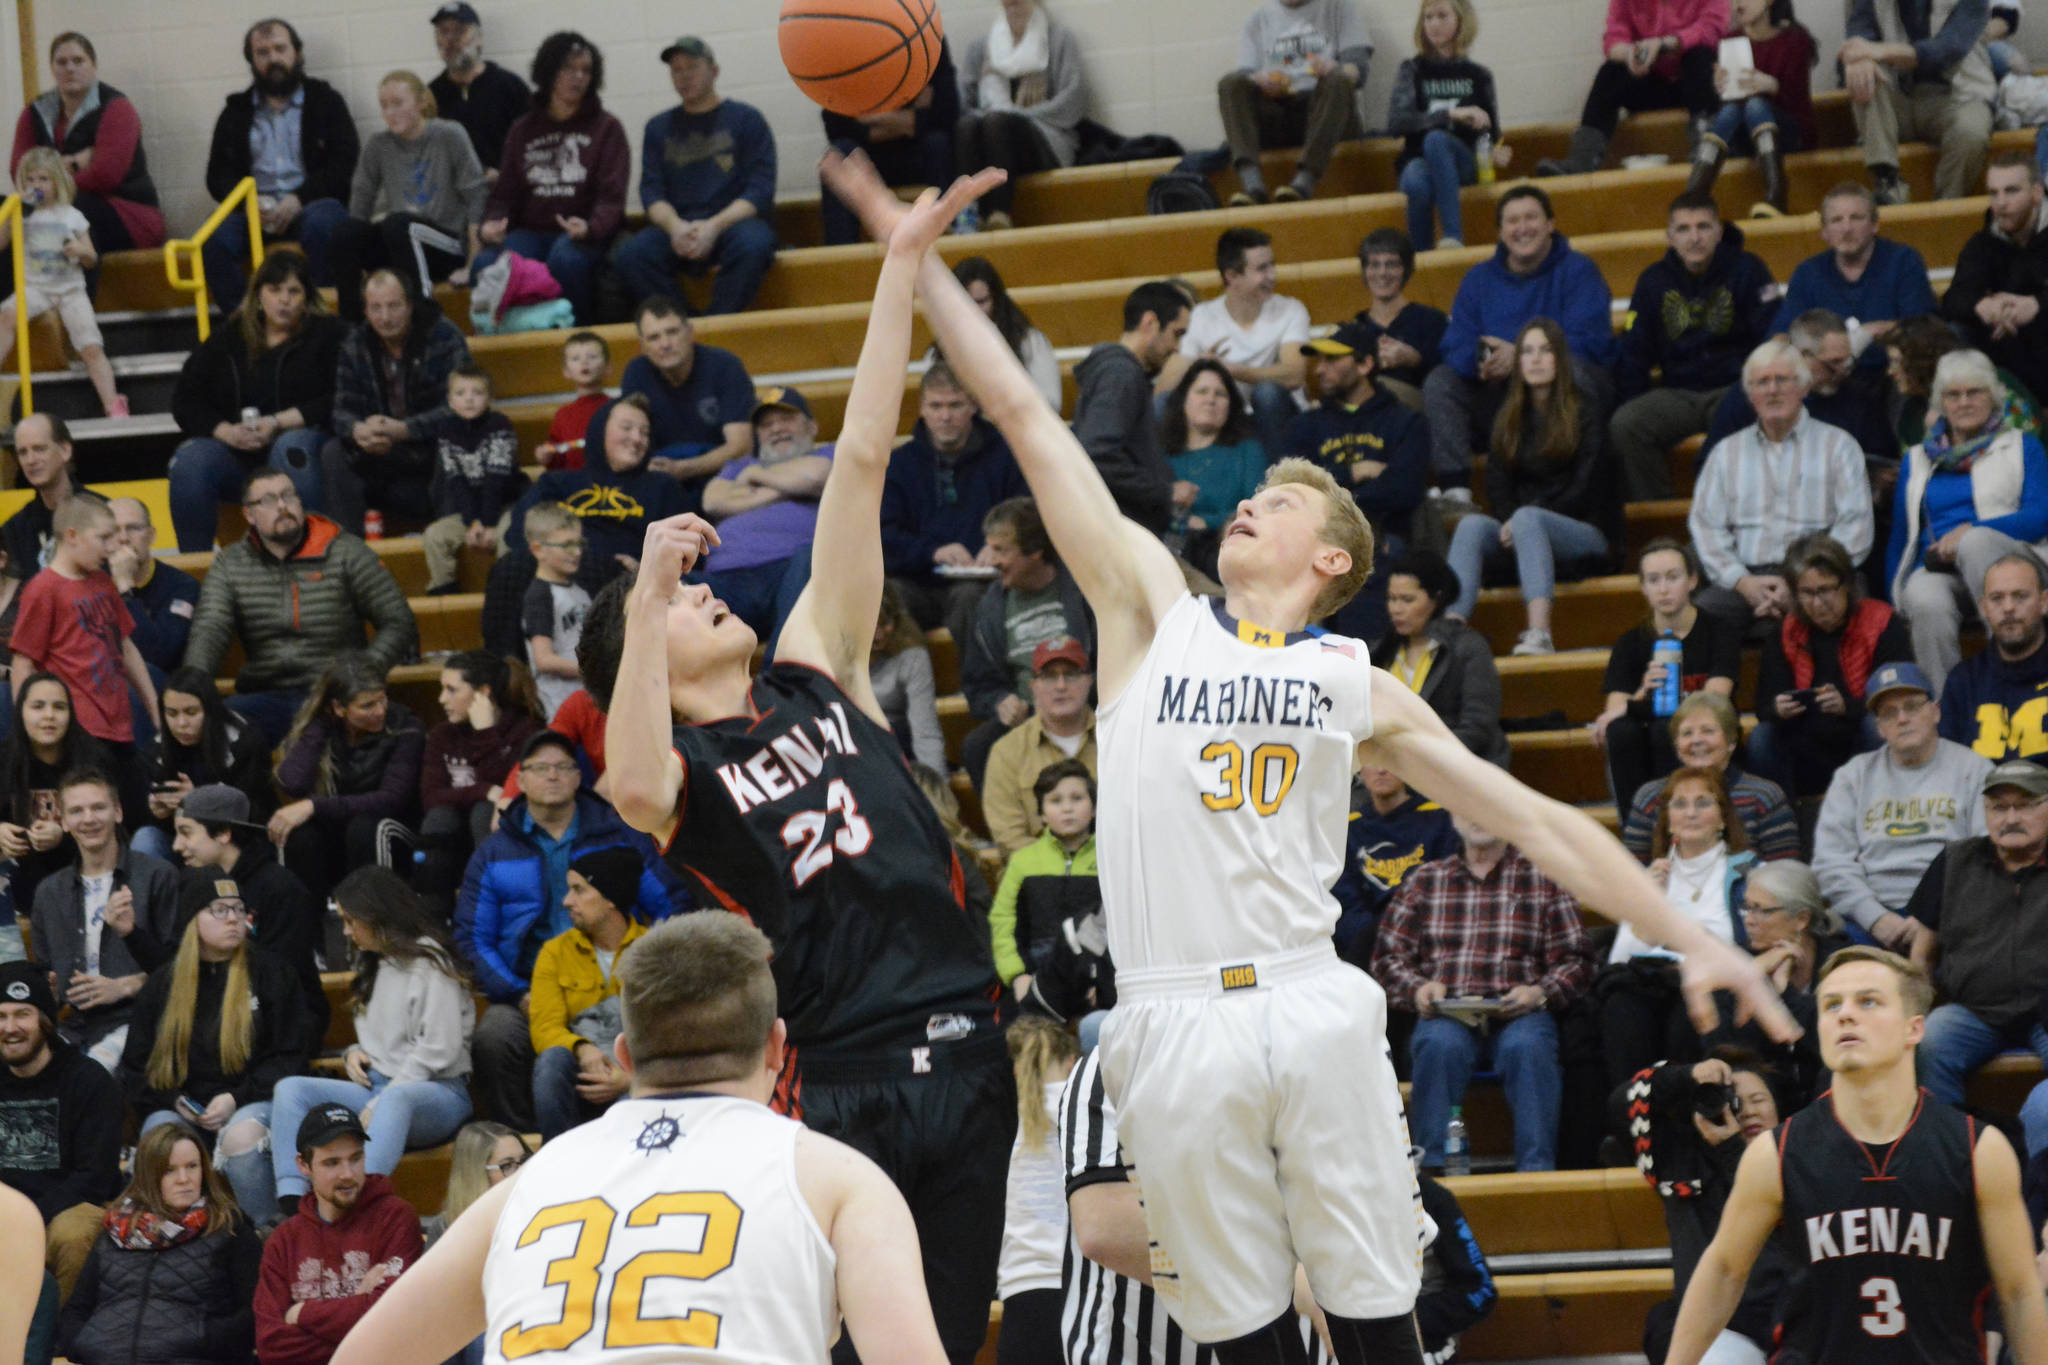 Mariner Japhet McGee wins the tip-off during a basketball game between the Homer Mariners and the Kenai Kardinals on Friday, Dec. 21, 2018, at the Homer High School Alice Witte Gym in Homer, Alaska. (Photo by Michael Armstrong/Homer News)